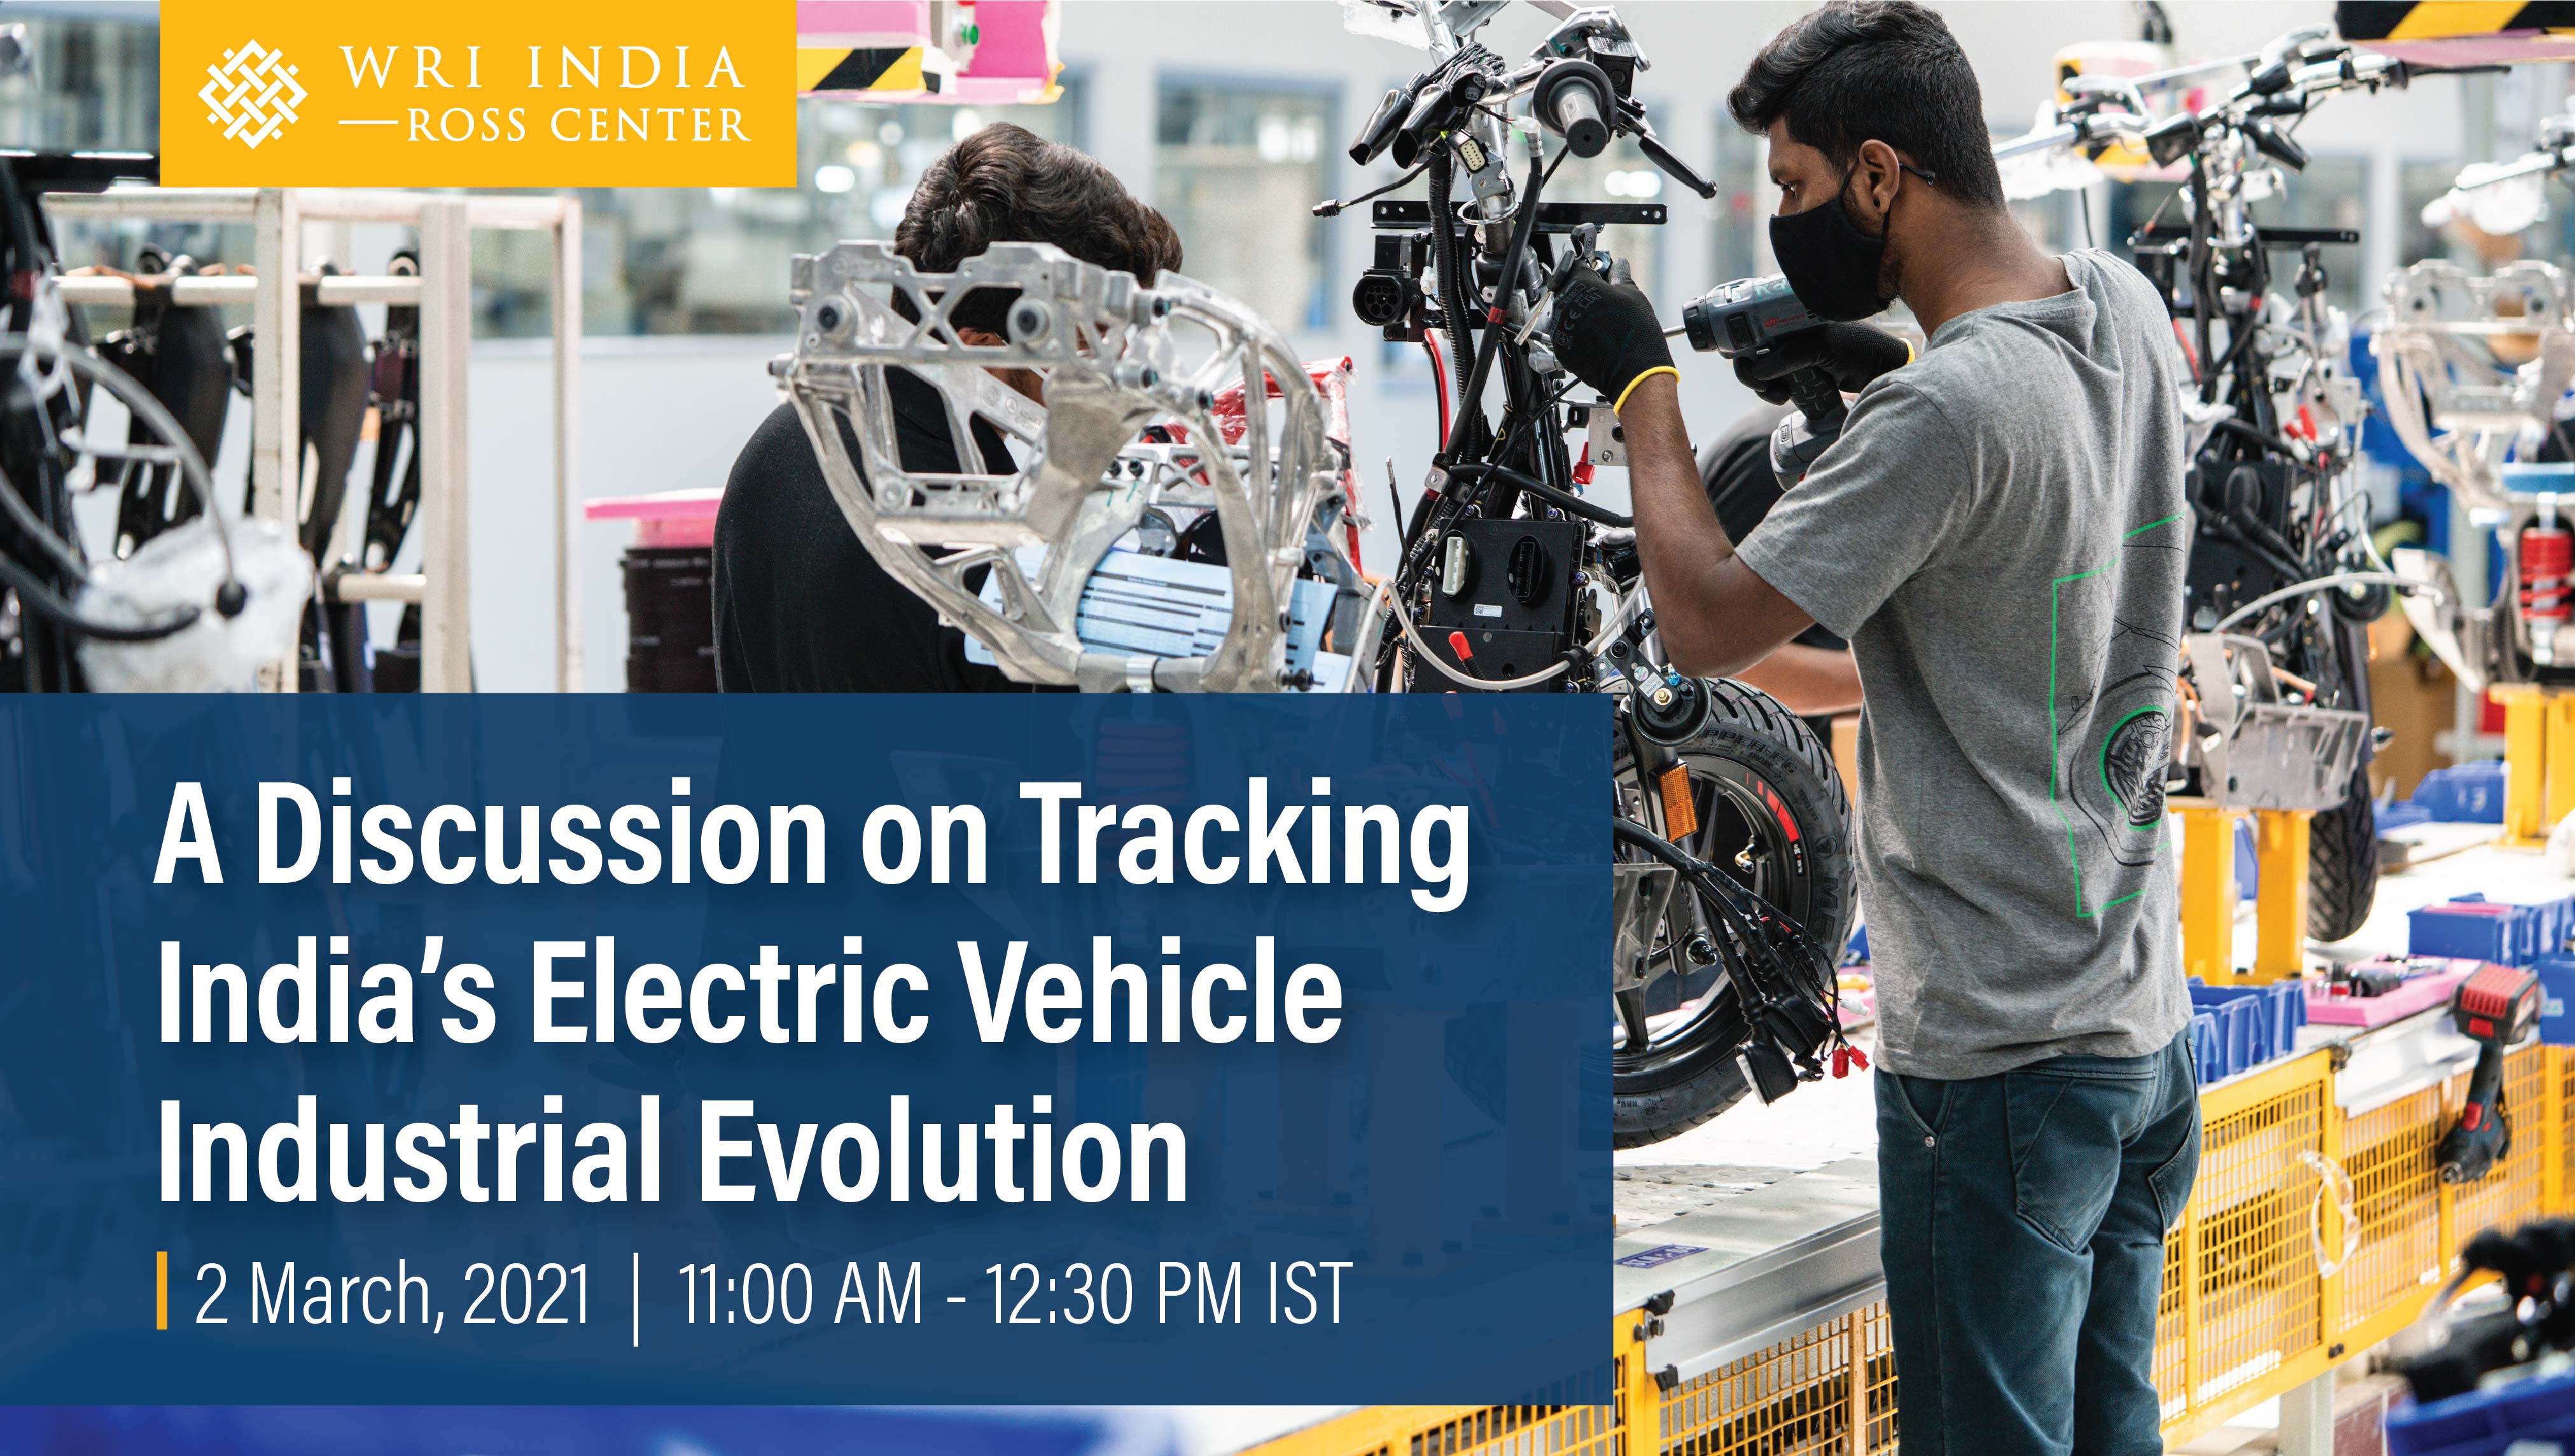 A Discussion on Tracking India’s Electric Vehicle Industrial Evolution